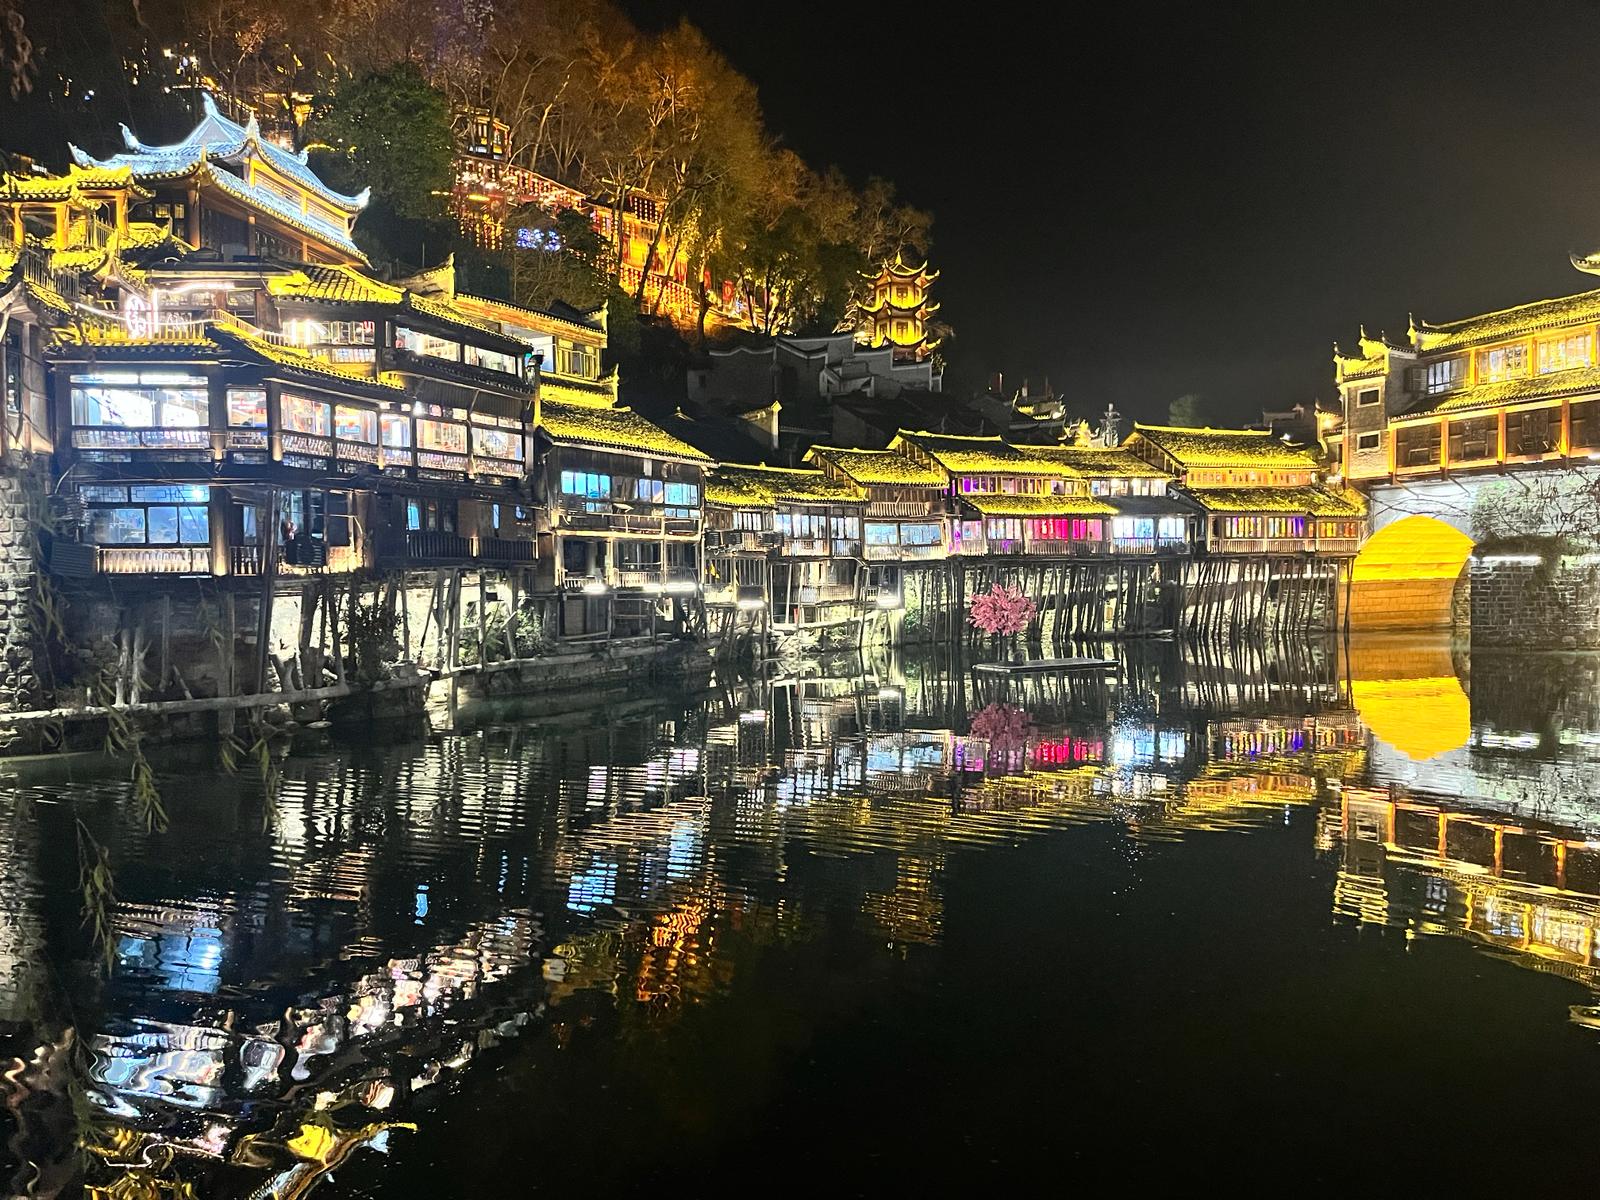 Magic things to see in Phoenix Ancient Town in Fenghuang County in China.